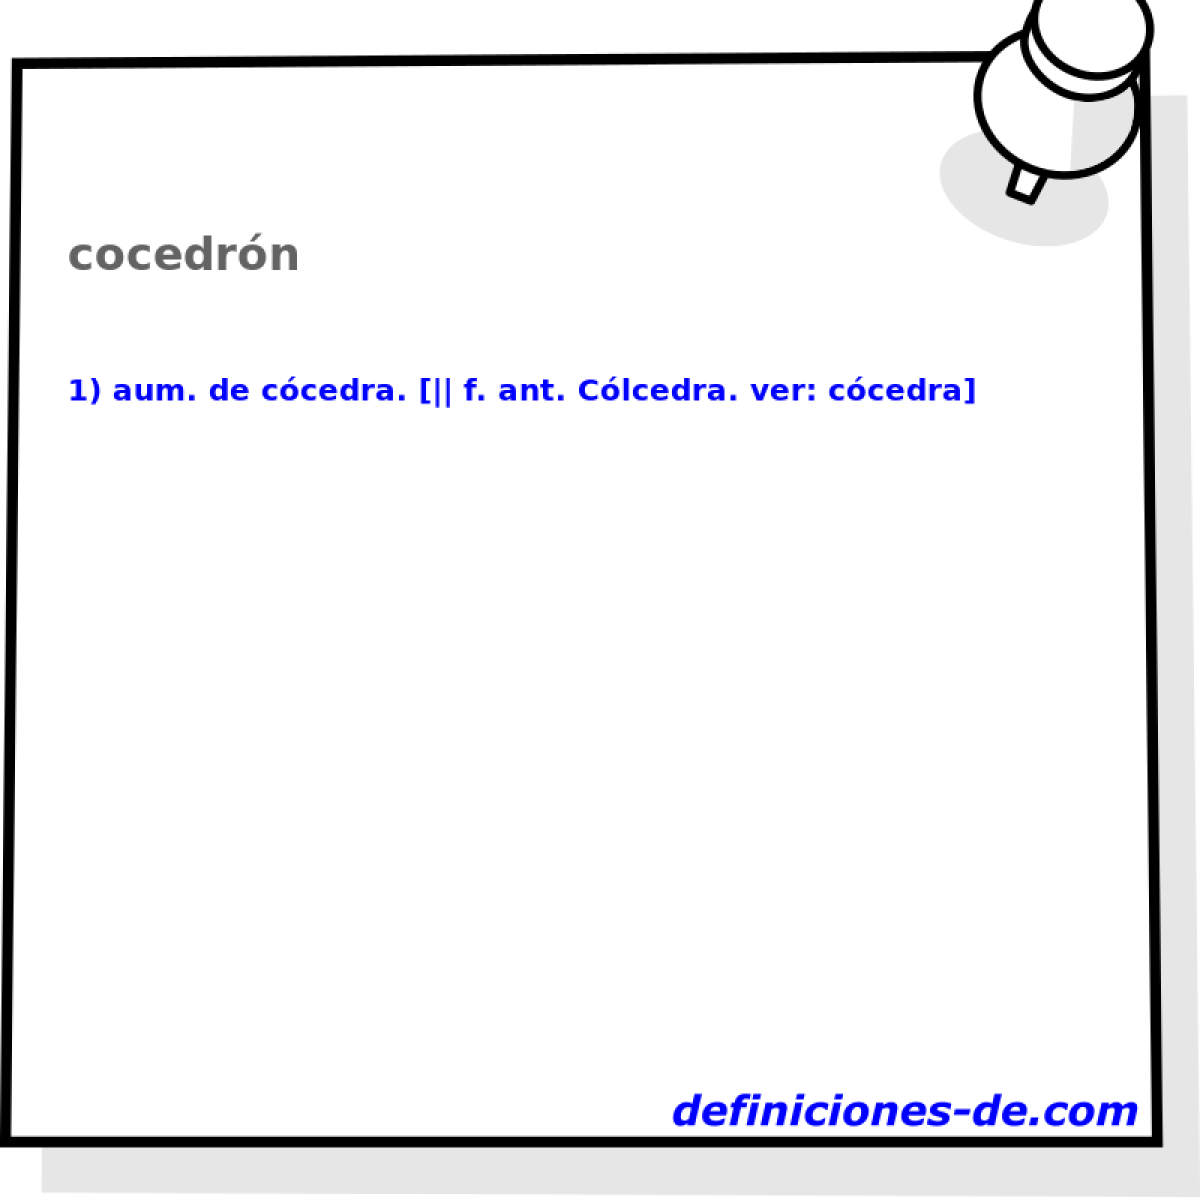 cocedrn 